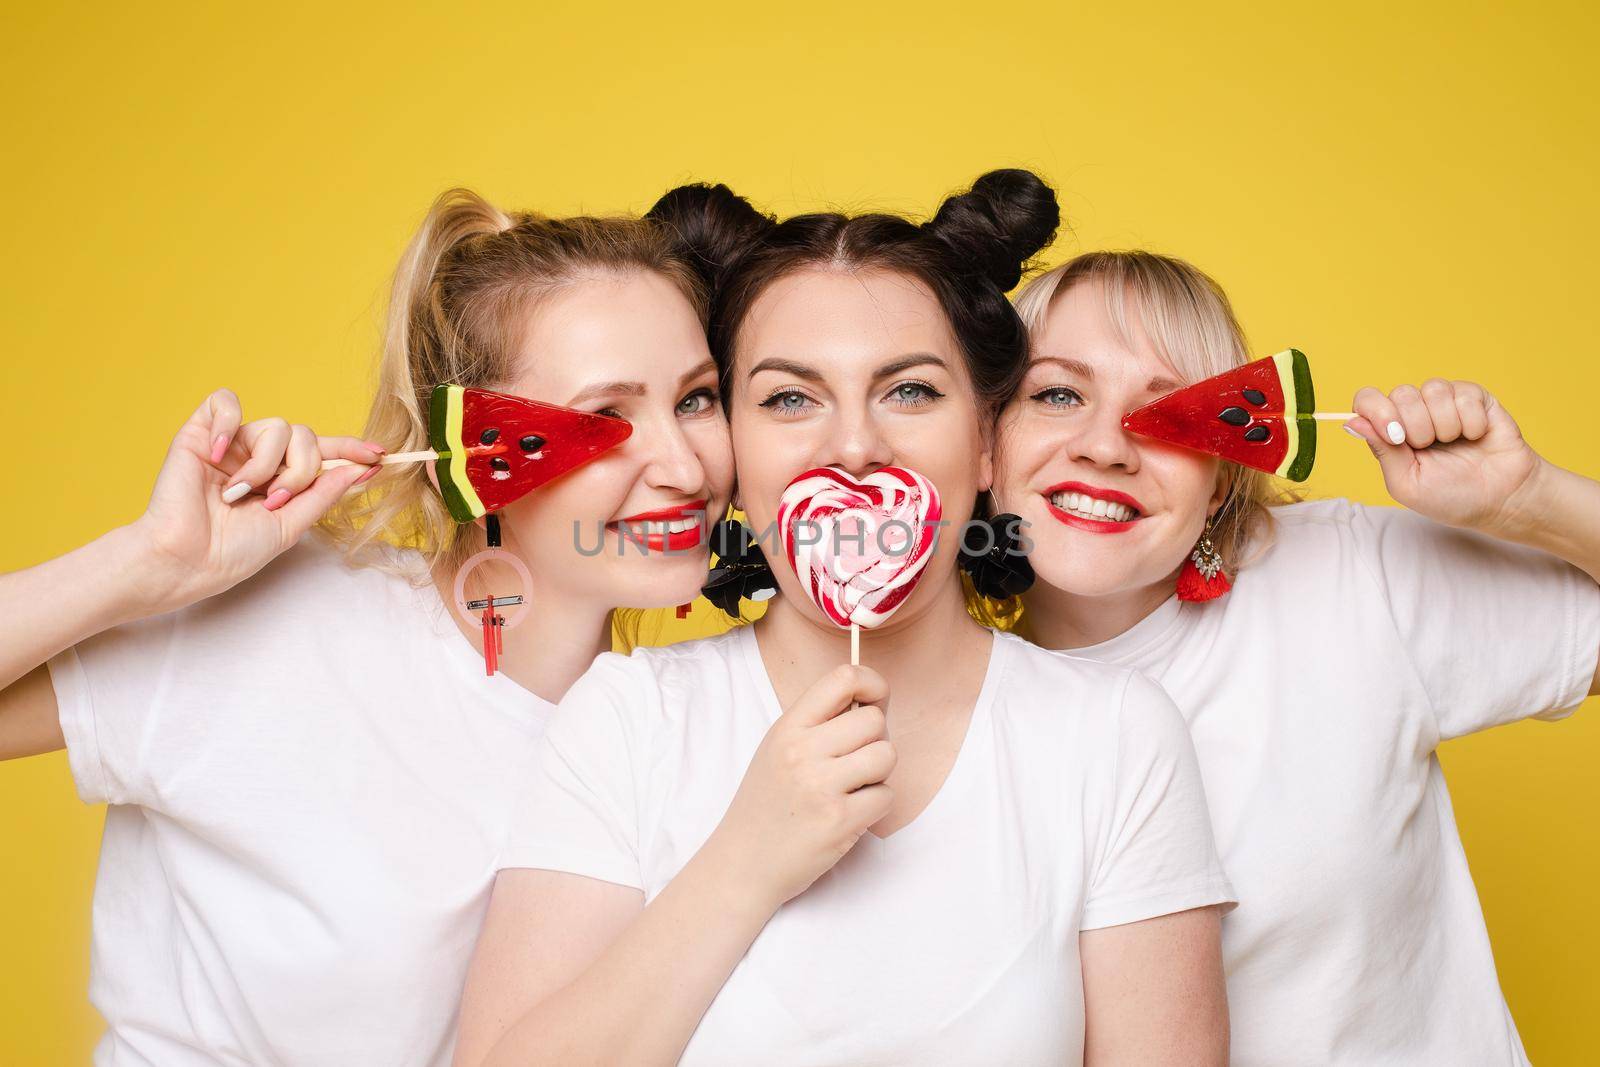 Three female friends celebrating a party event having fun and smiling with lolipops